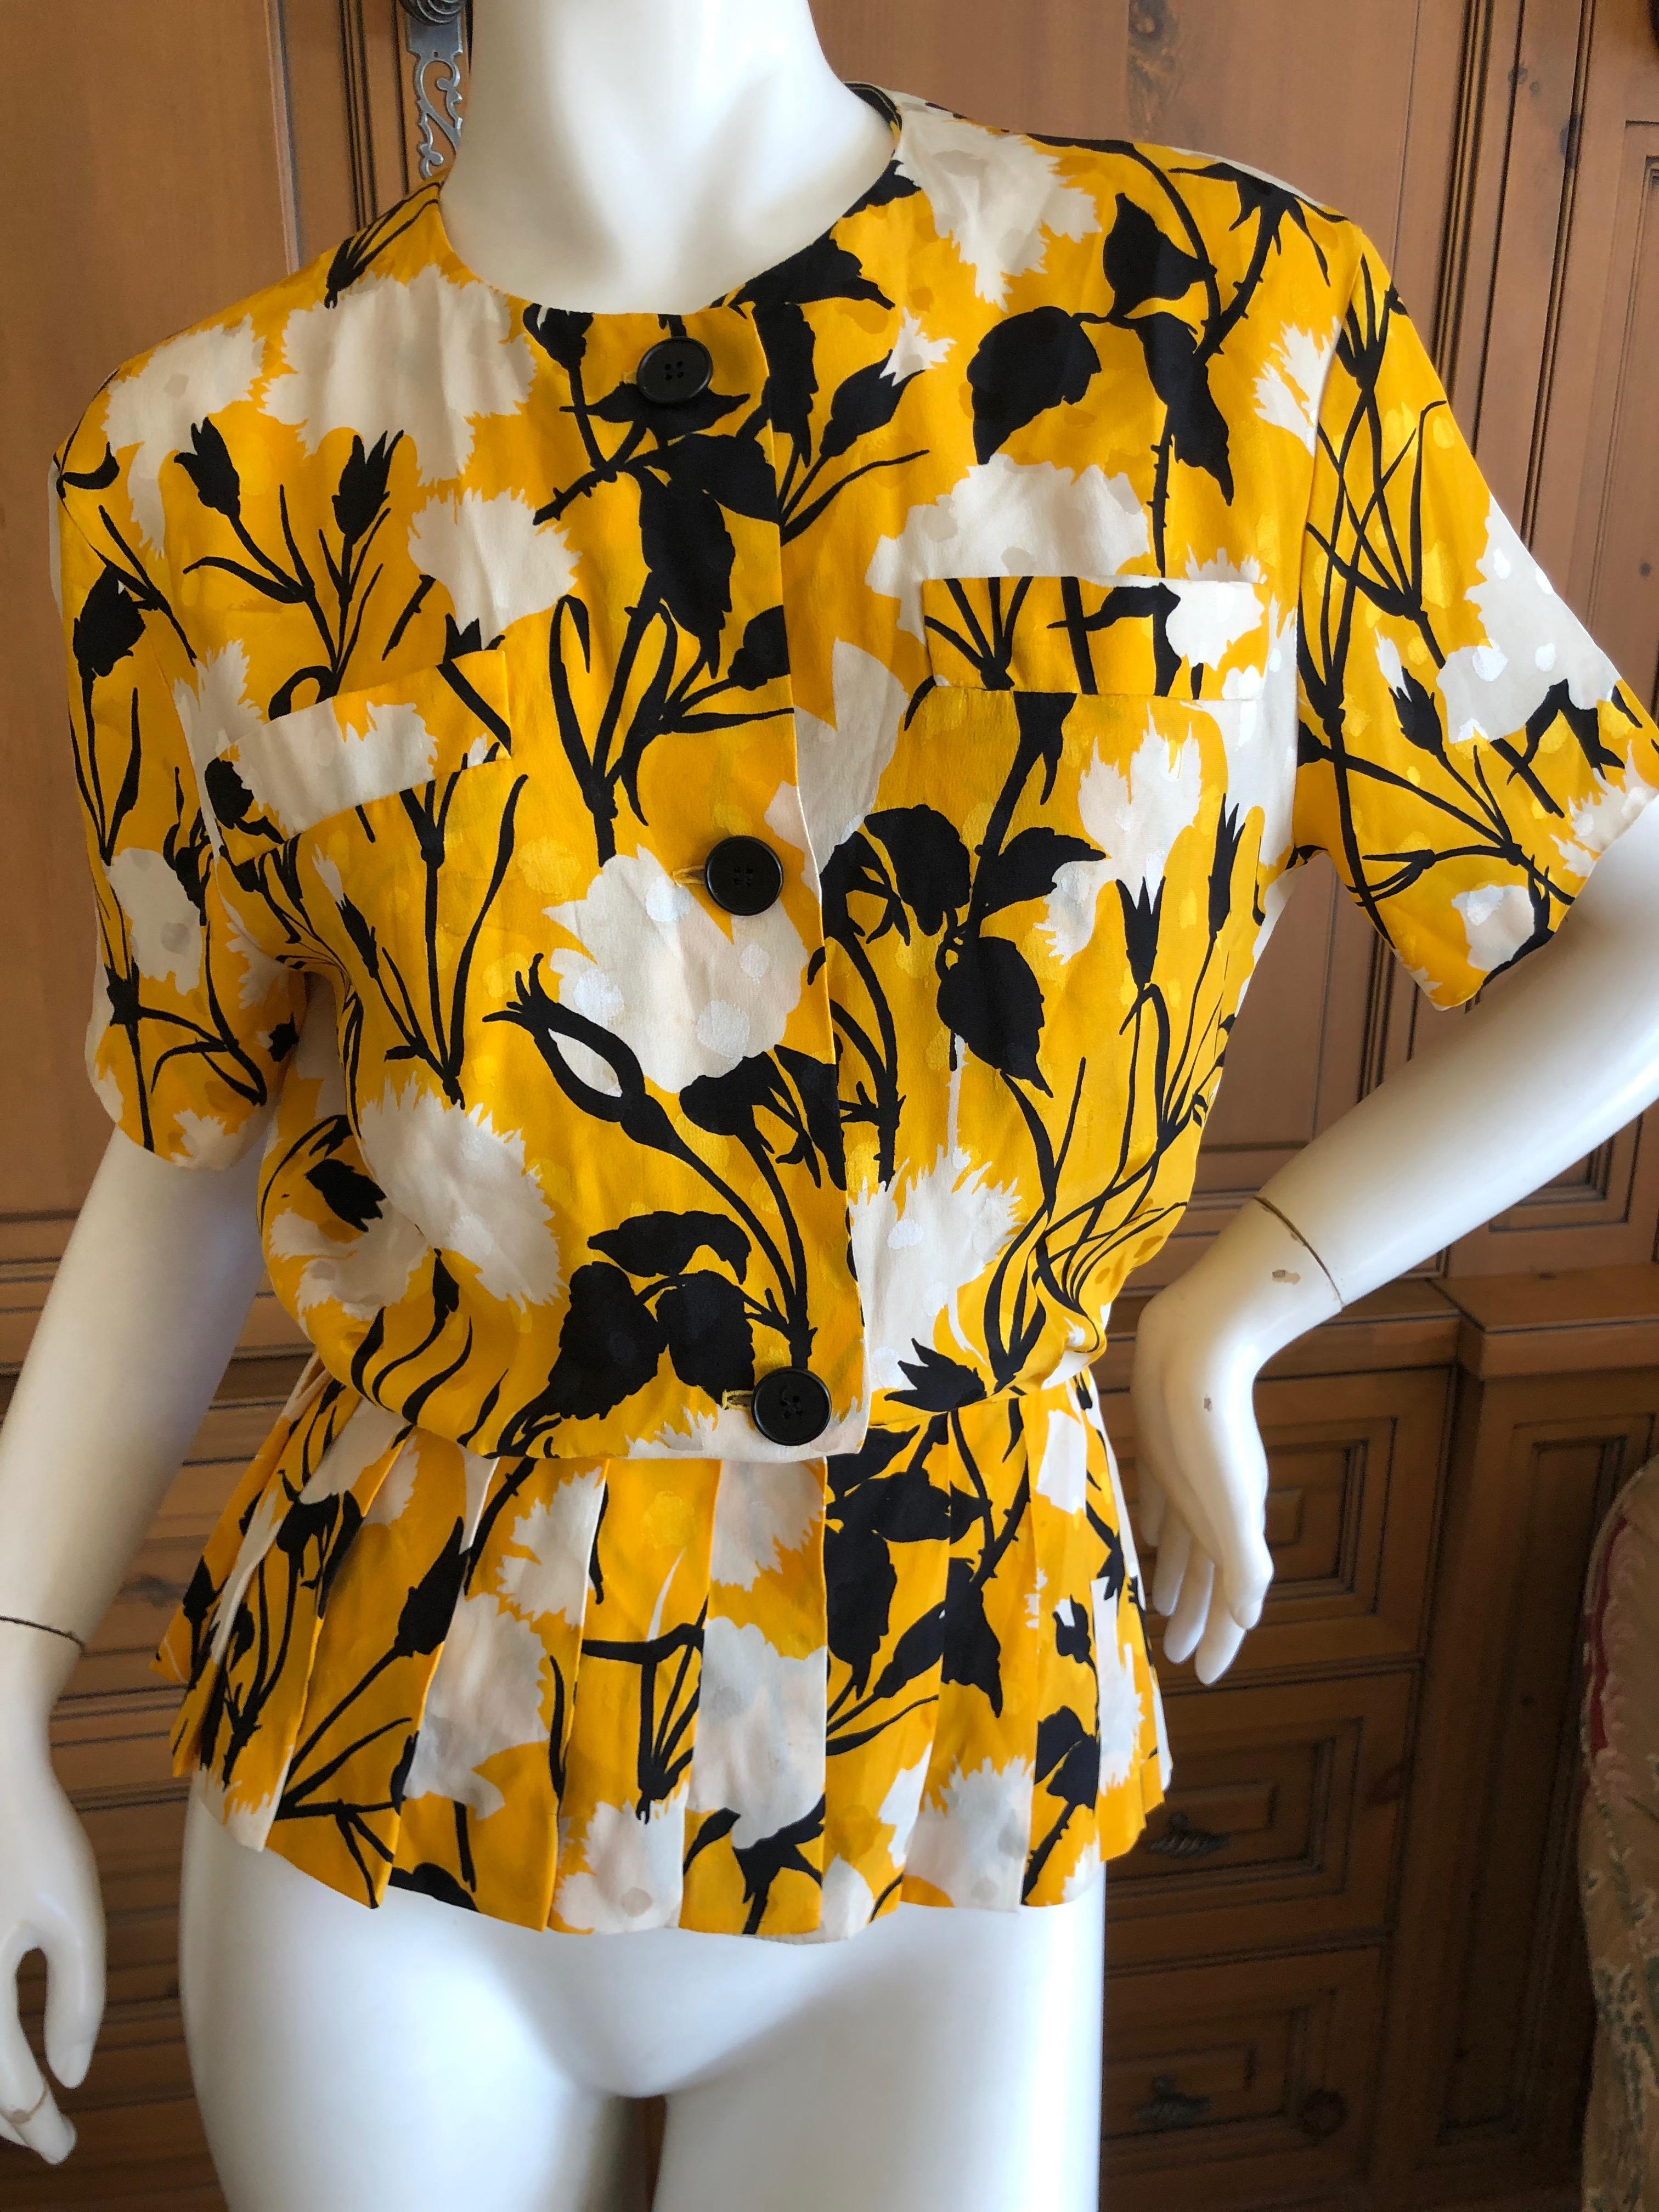 Christian Dior by Gianfranco Ferre Blossom Pattern Silk Top
Bust 38